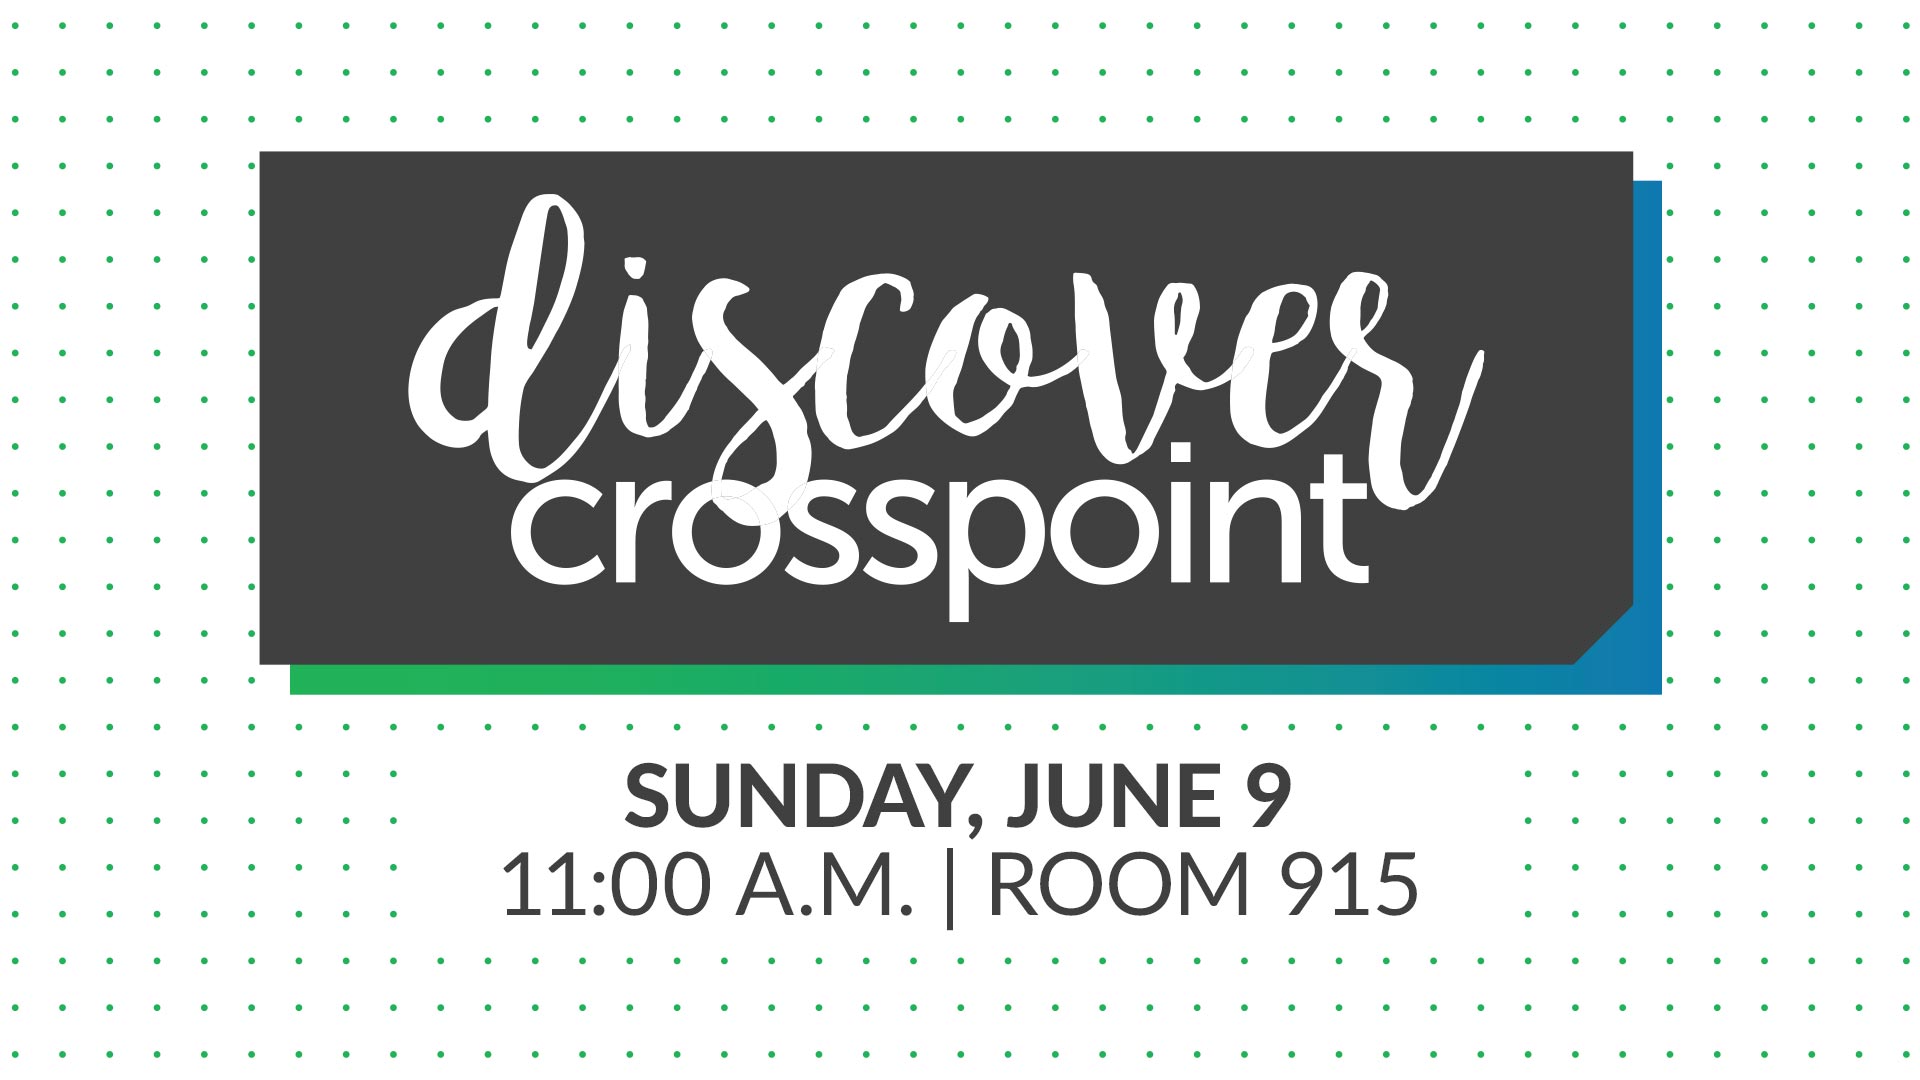 Discover Crosspoint